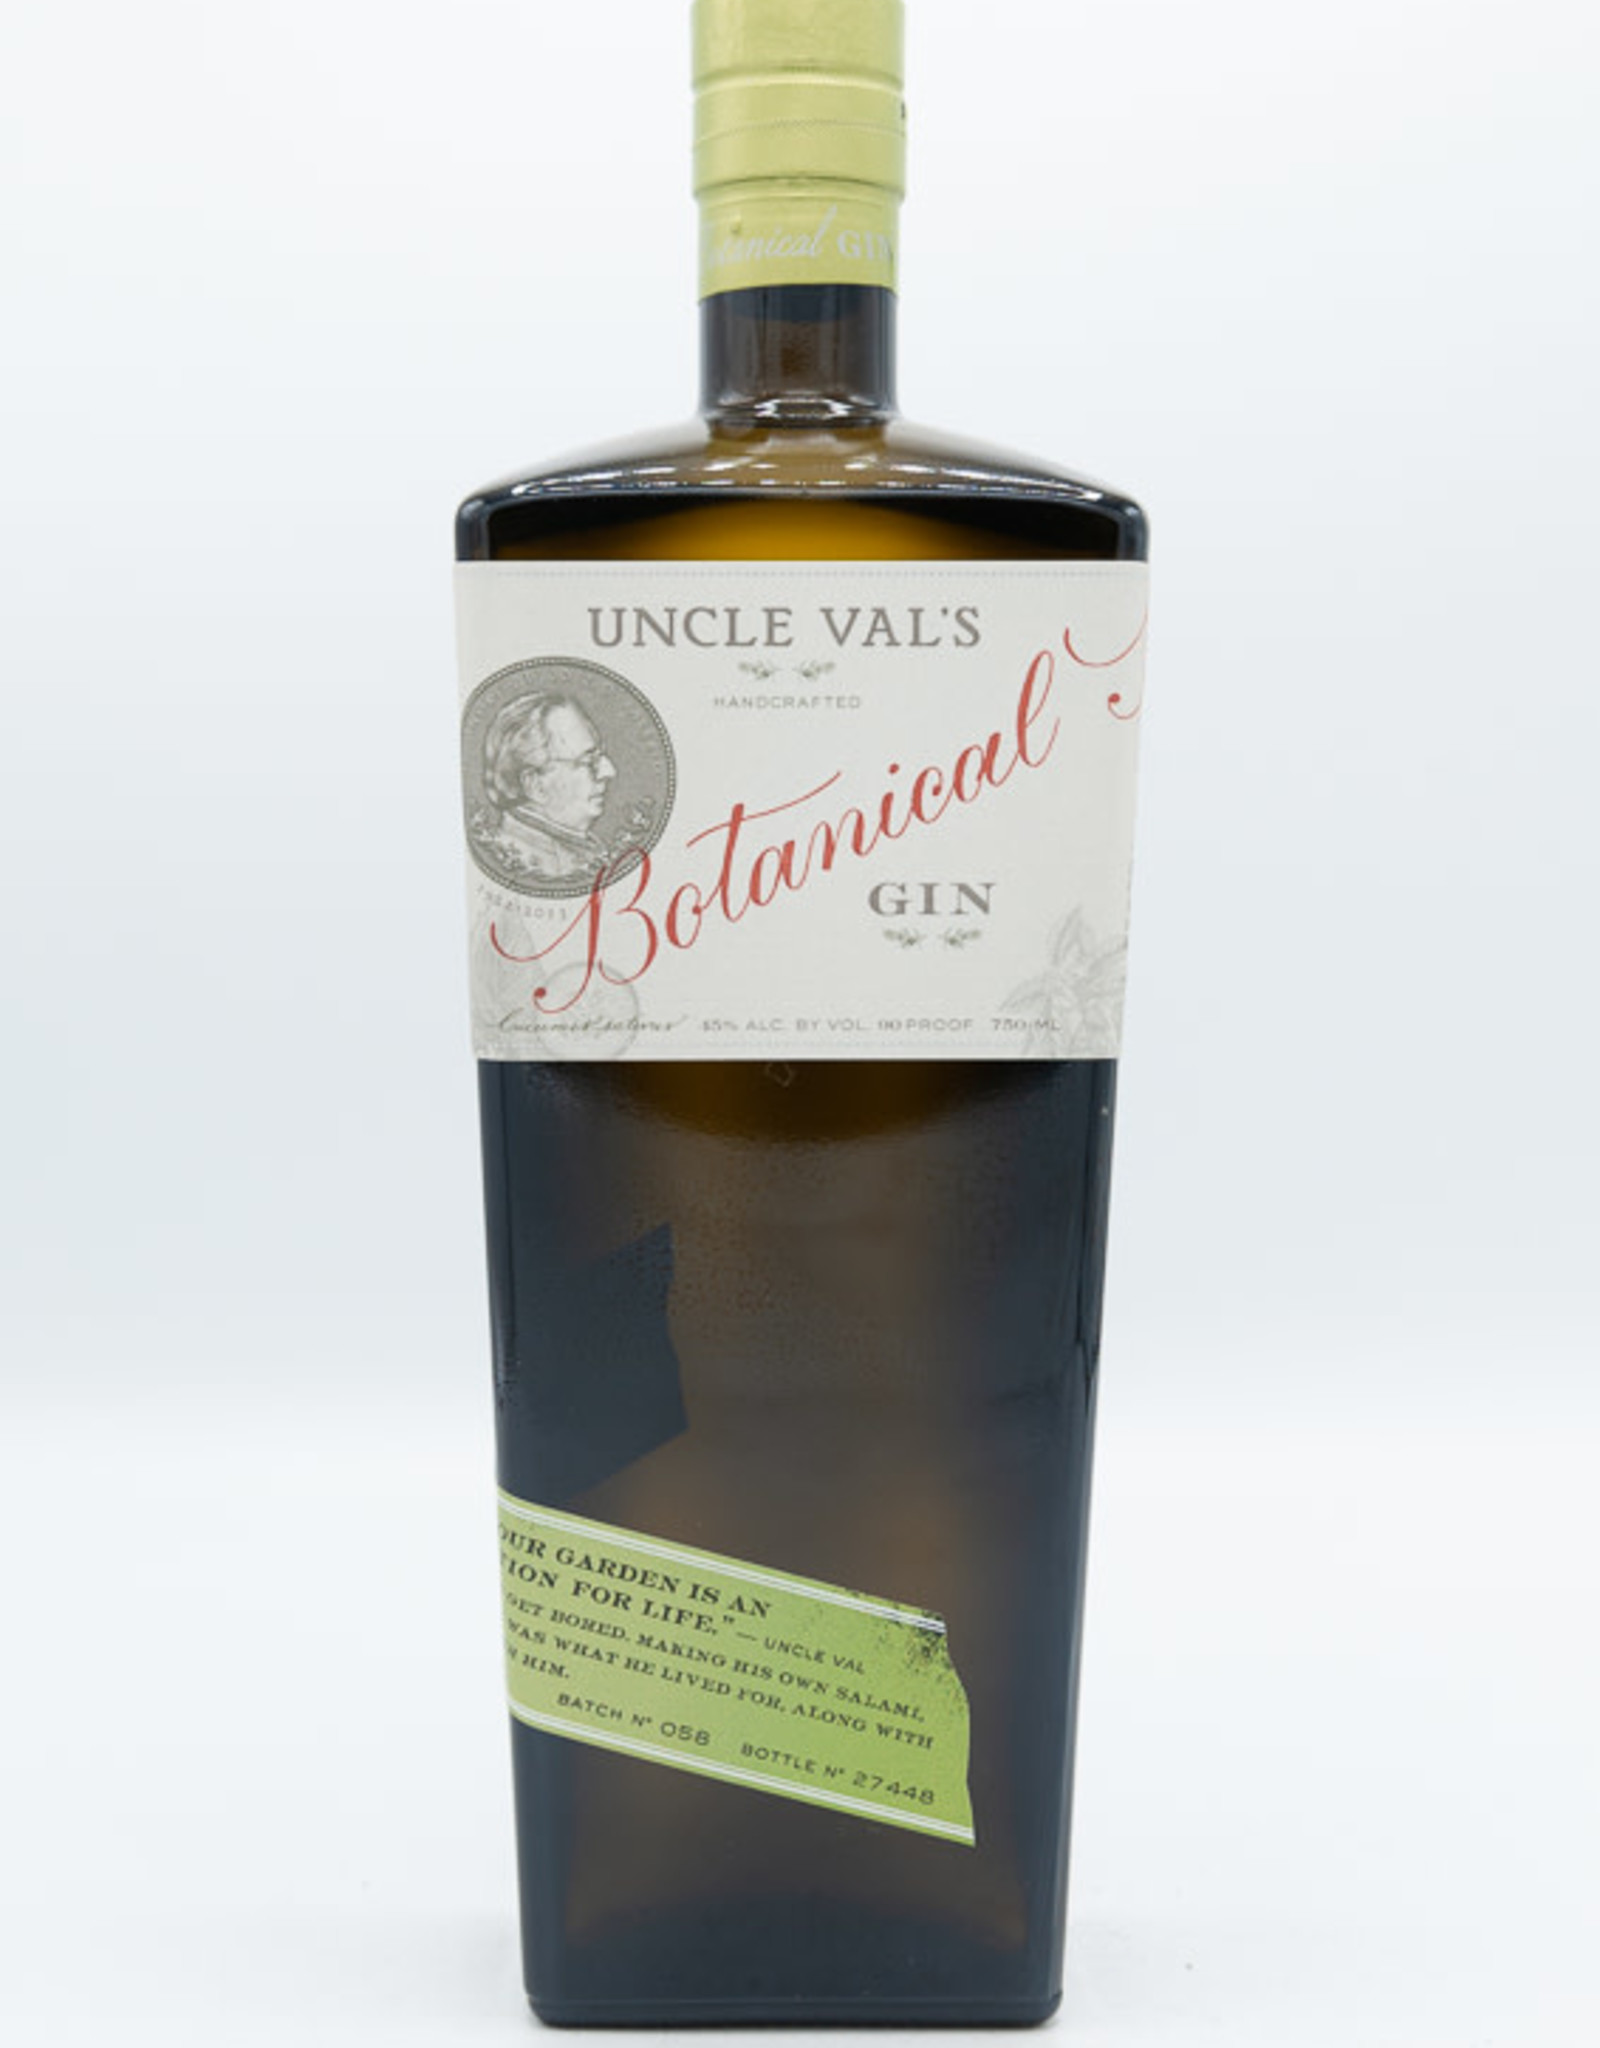 Uncle Val's Uncle Val's Botanical Gin